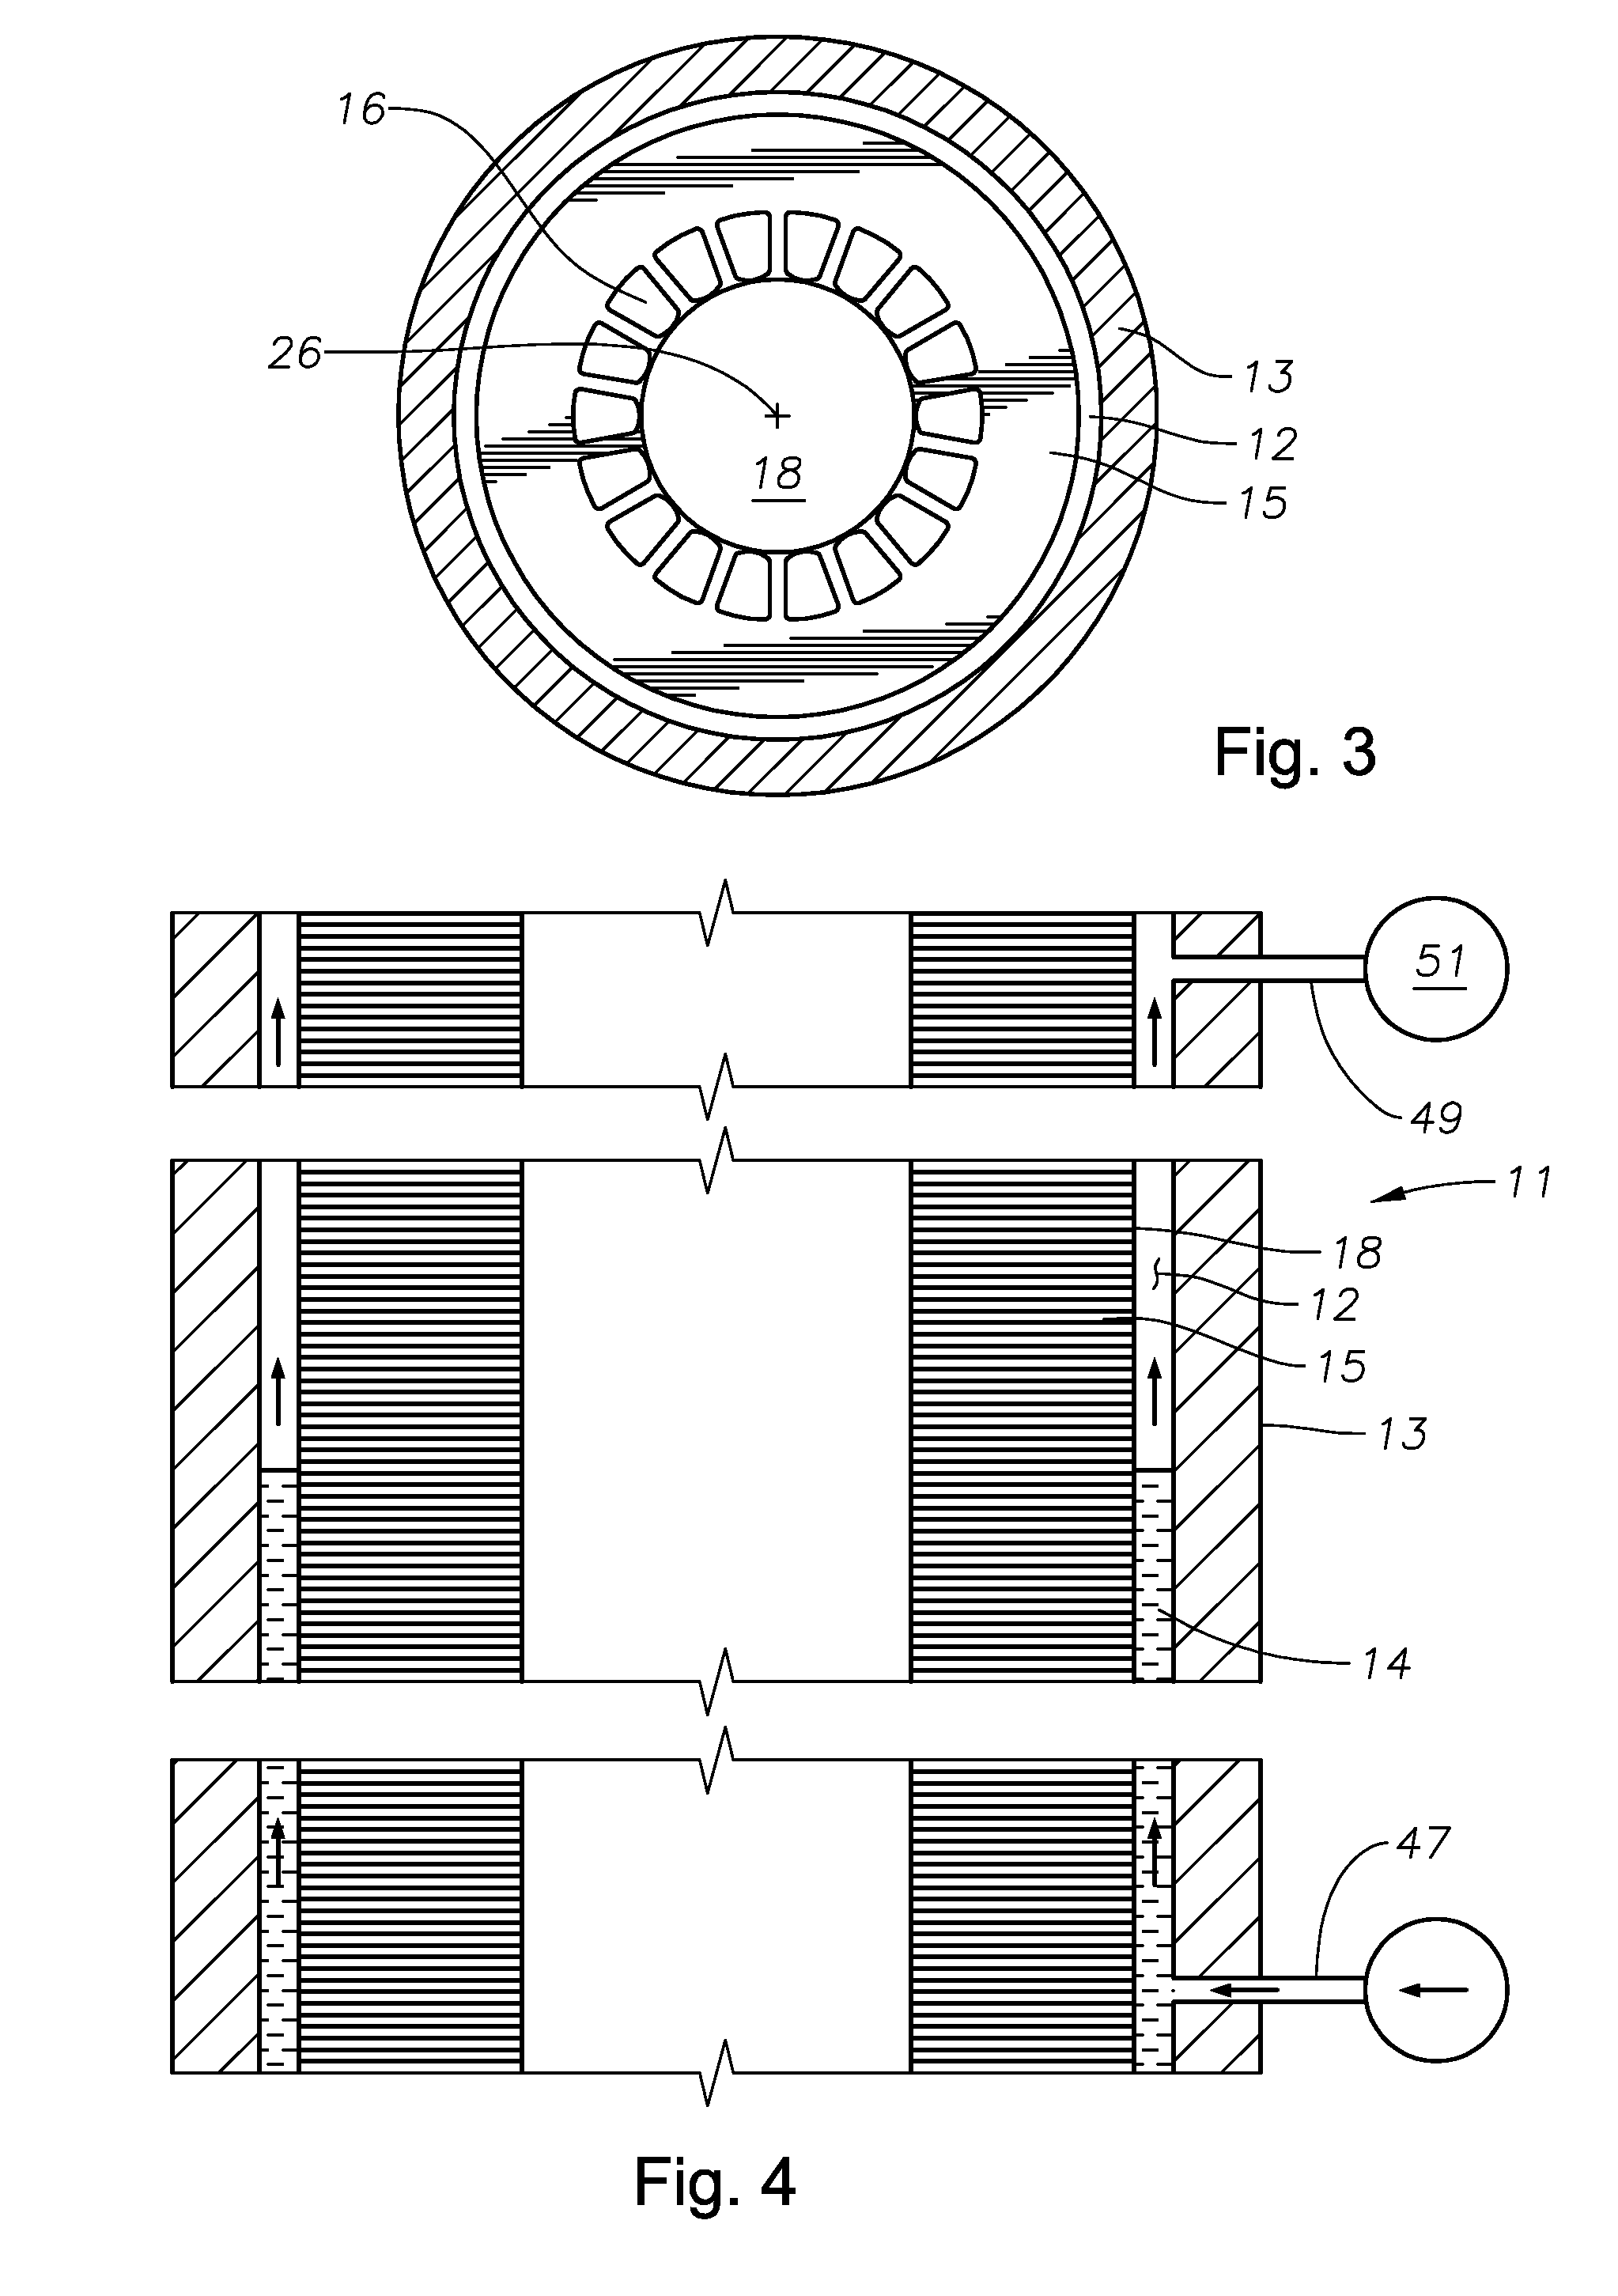 Enhanced thermal conductivity material in annular gap between electrical motor stator and housing